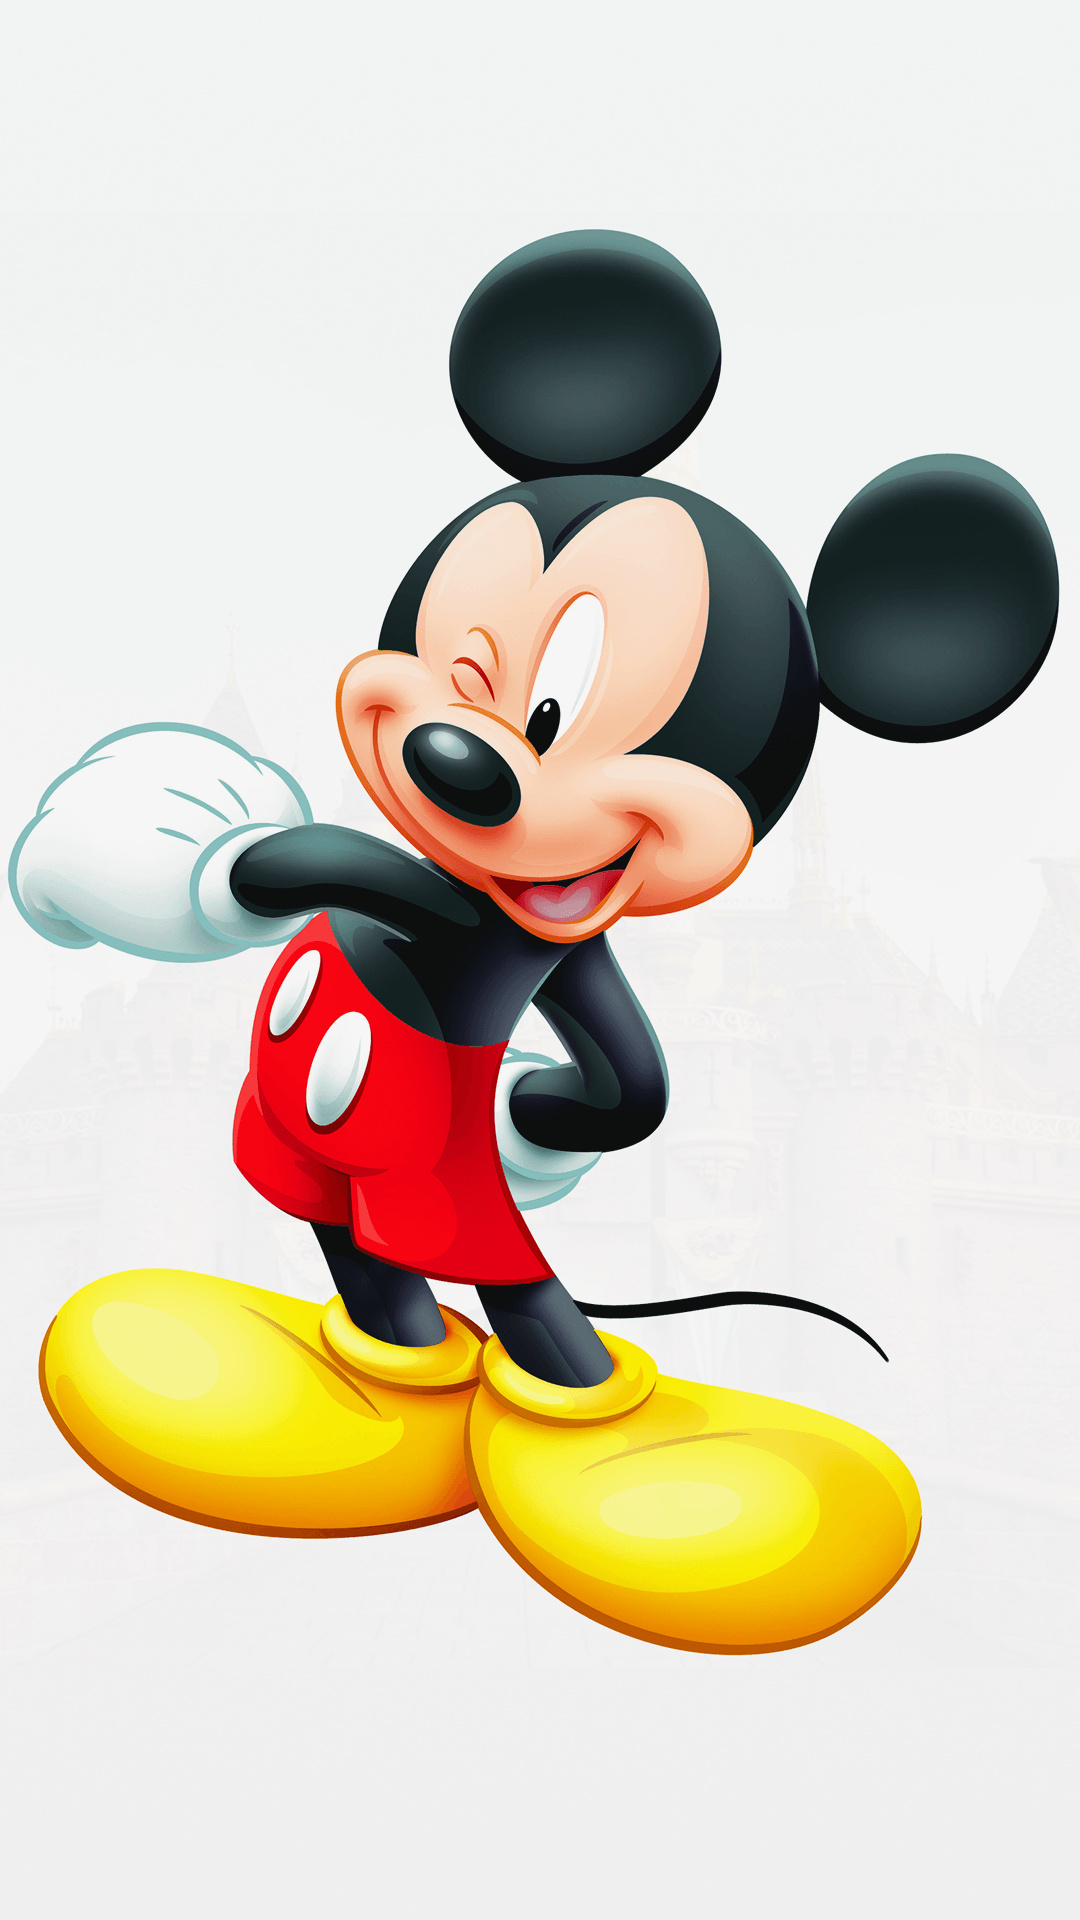 Mickey Mouse wallpaper for home screen, Striking visuals, Disney's beloved character, 1080x1920 Full HD Handy